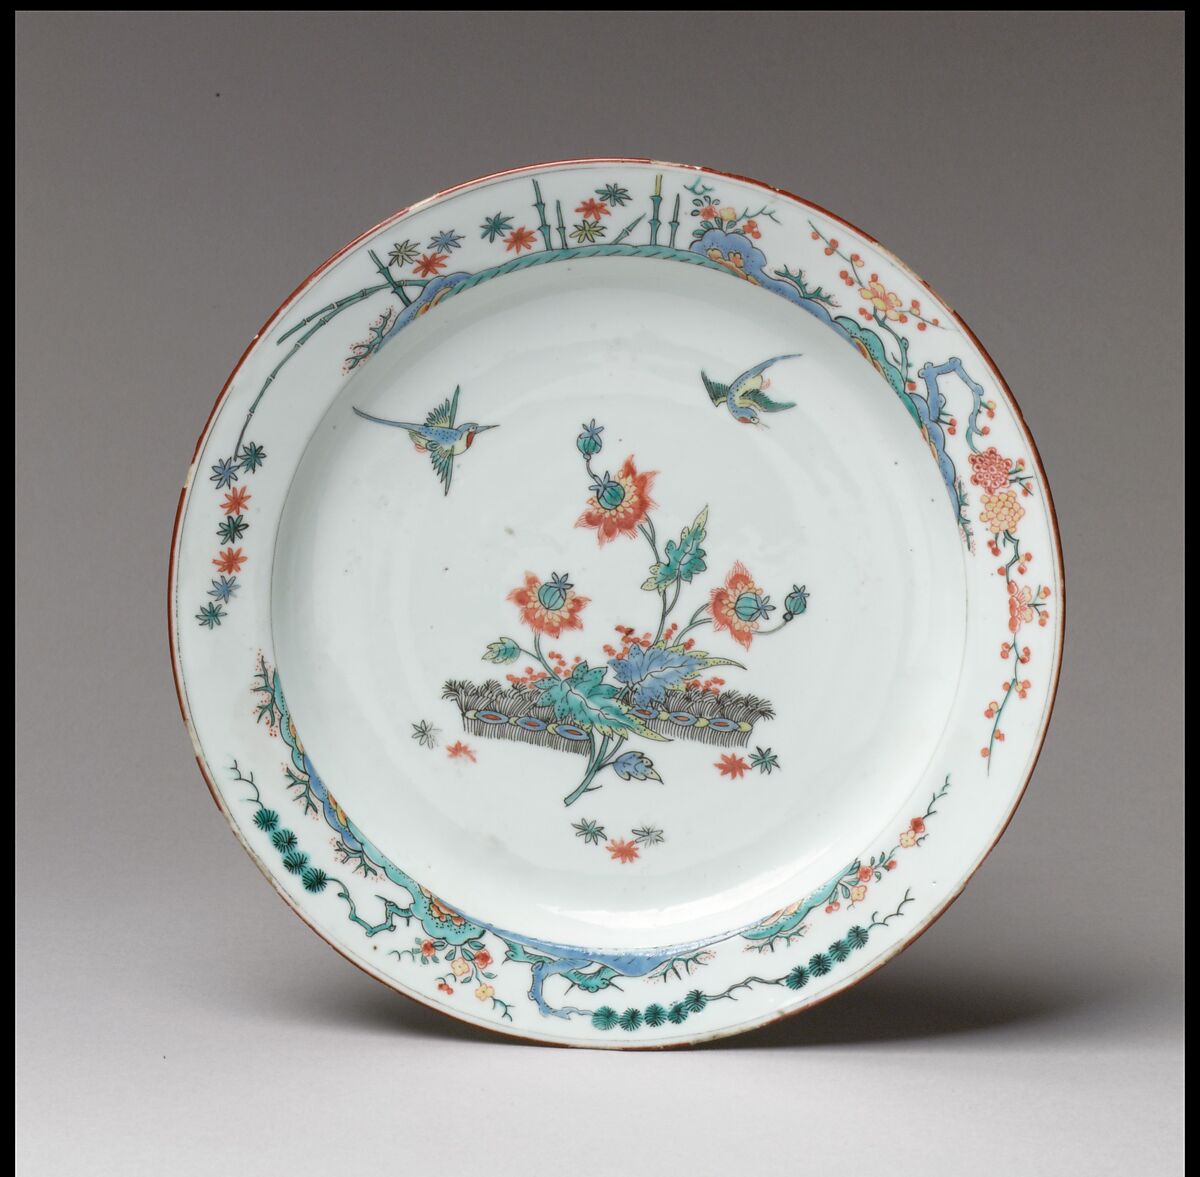 Plate, Hard-paste porcelain, Chinese with Dutch decoration, for European market 